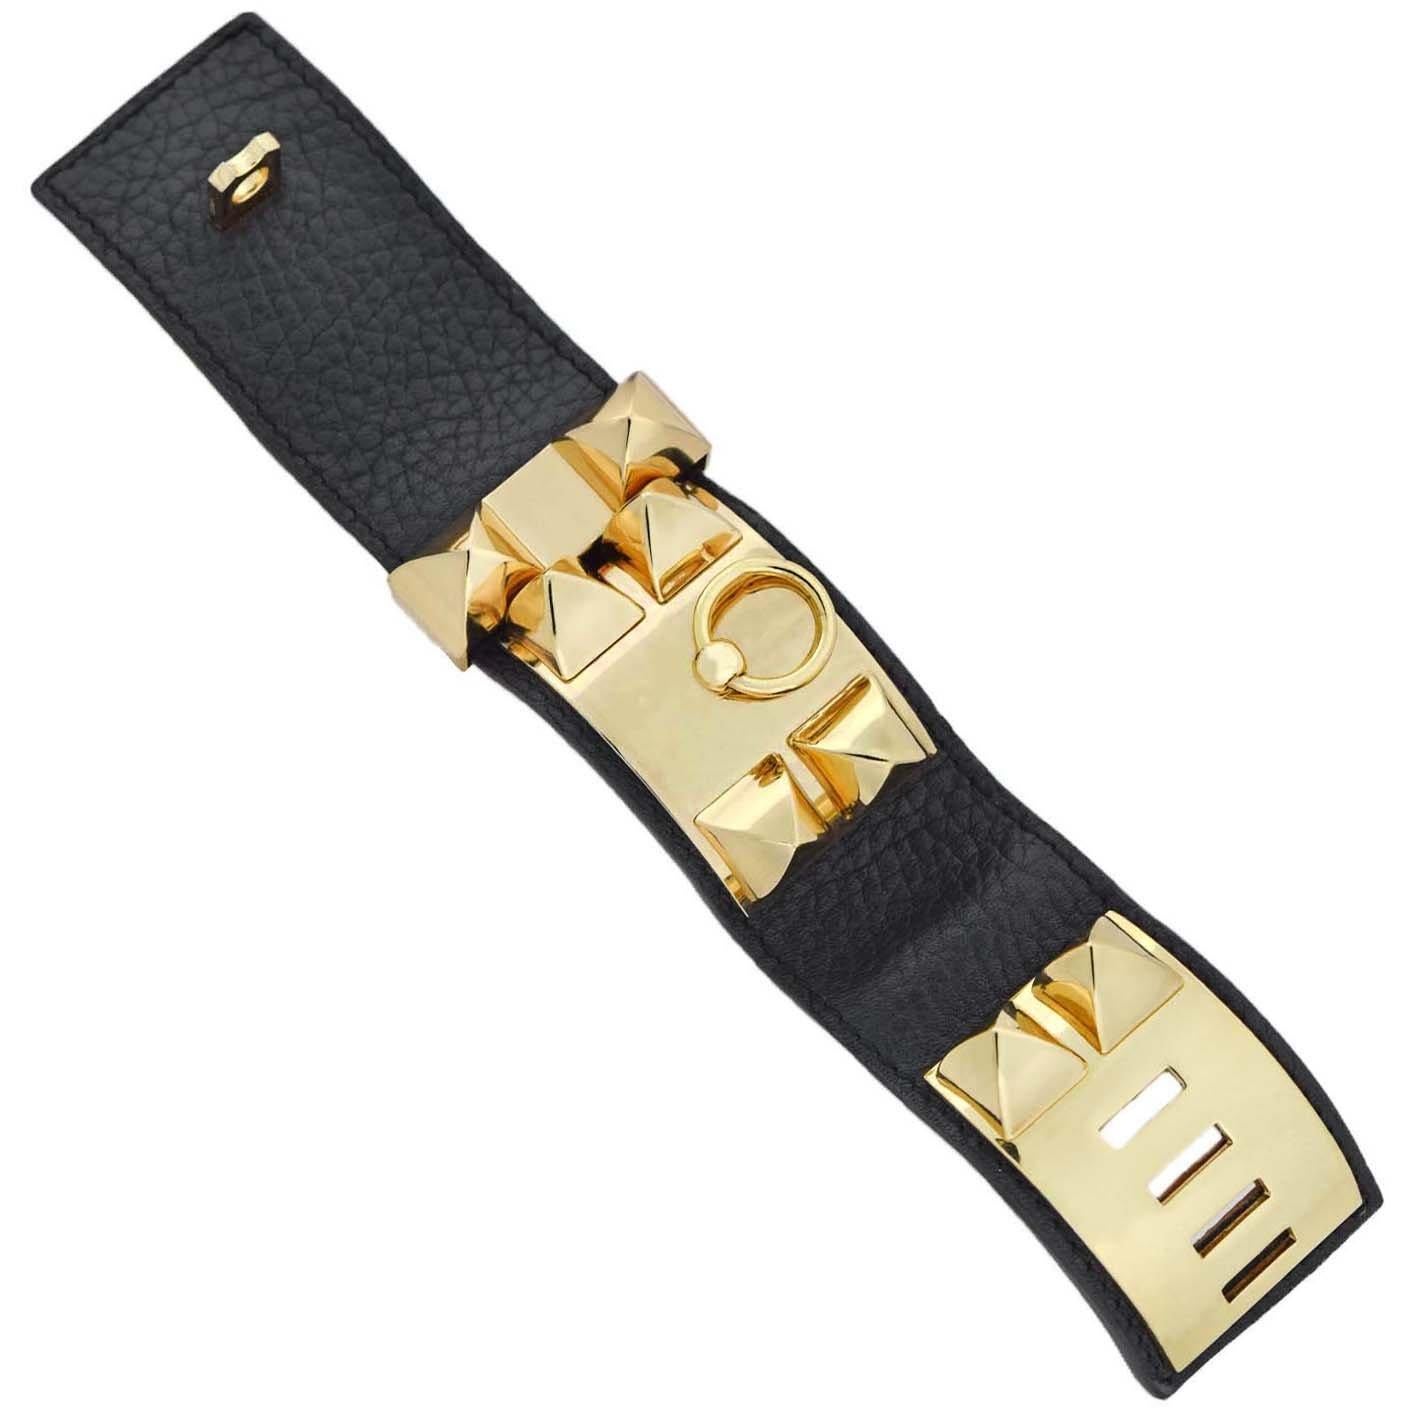 This striking Estate bracelet is a signed piece from Hermés Paris! Known as the Collier de Chien bracelet, this wide, wrap around cuff is crafted out of Epsom calfskin black leather with fabulous gold-tone accents. Adorning the front of the piece is